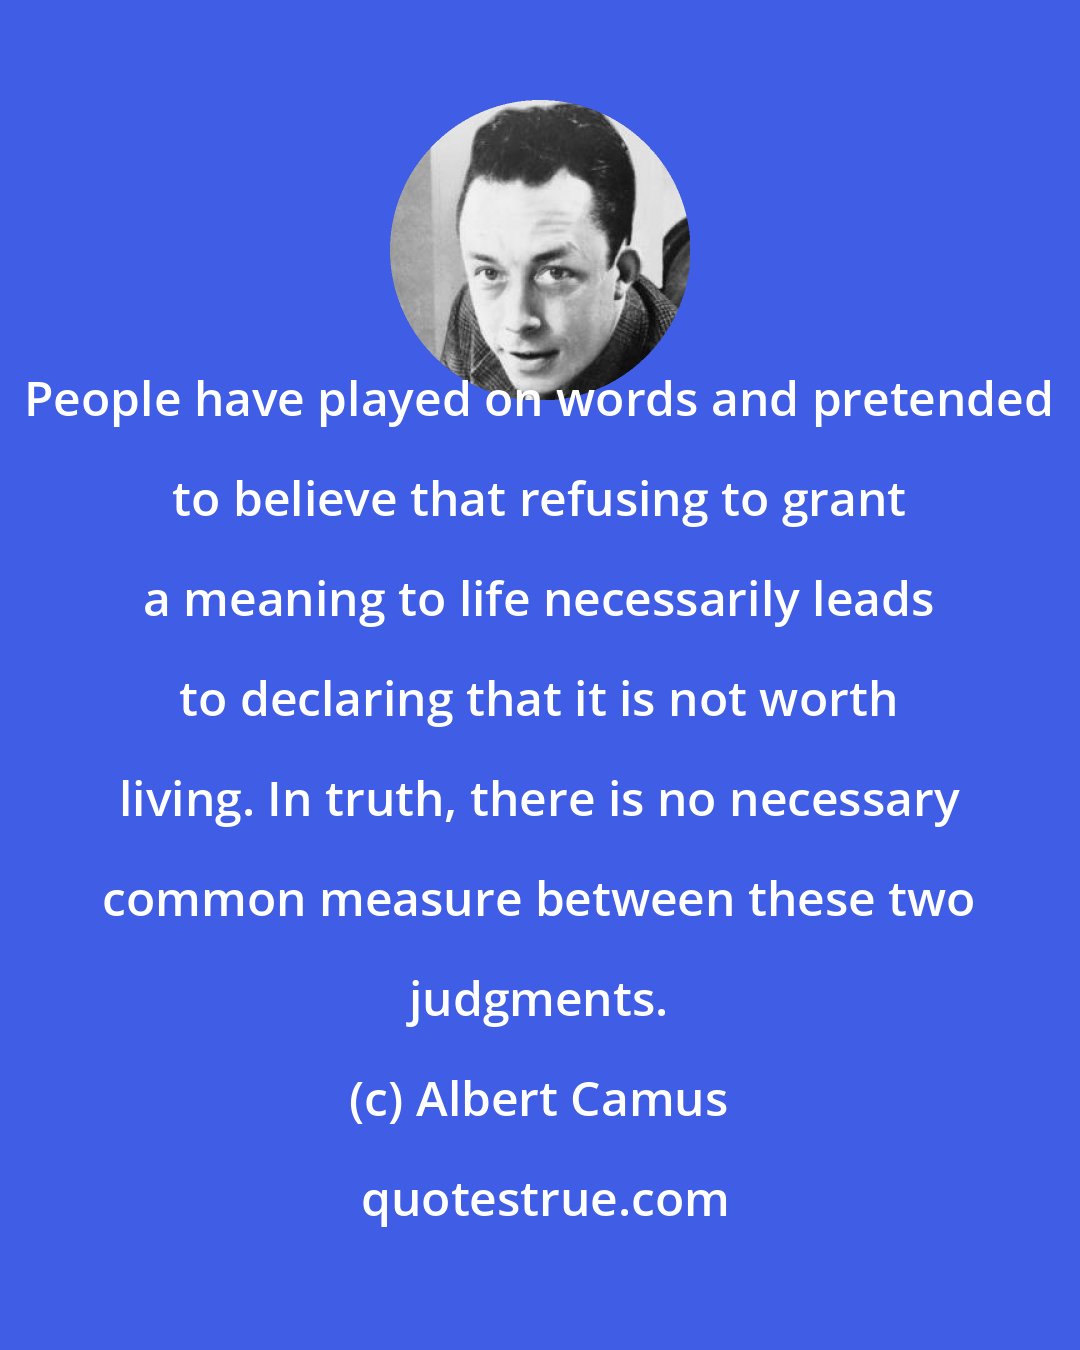 Albert Camus: People have played on words and pretended to believe that refusing to grant a meaning to life necessarily leads to declaring that it is not worth living. In truth, there is no necessary common measure between these two judgments.